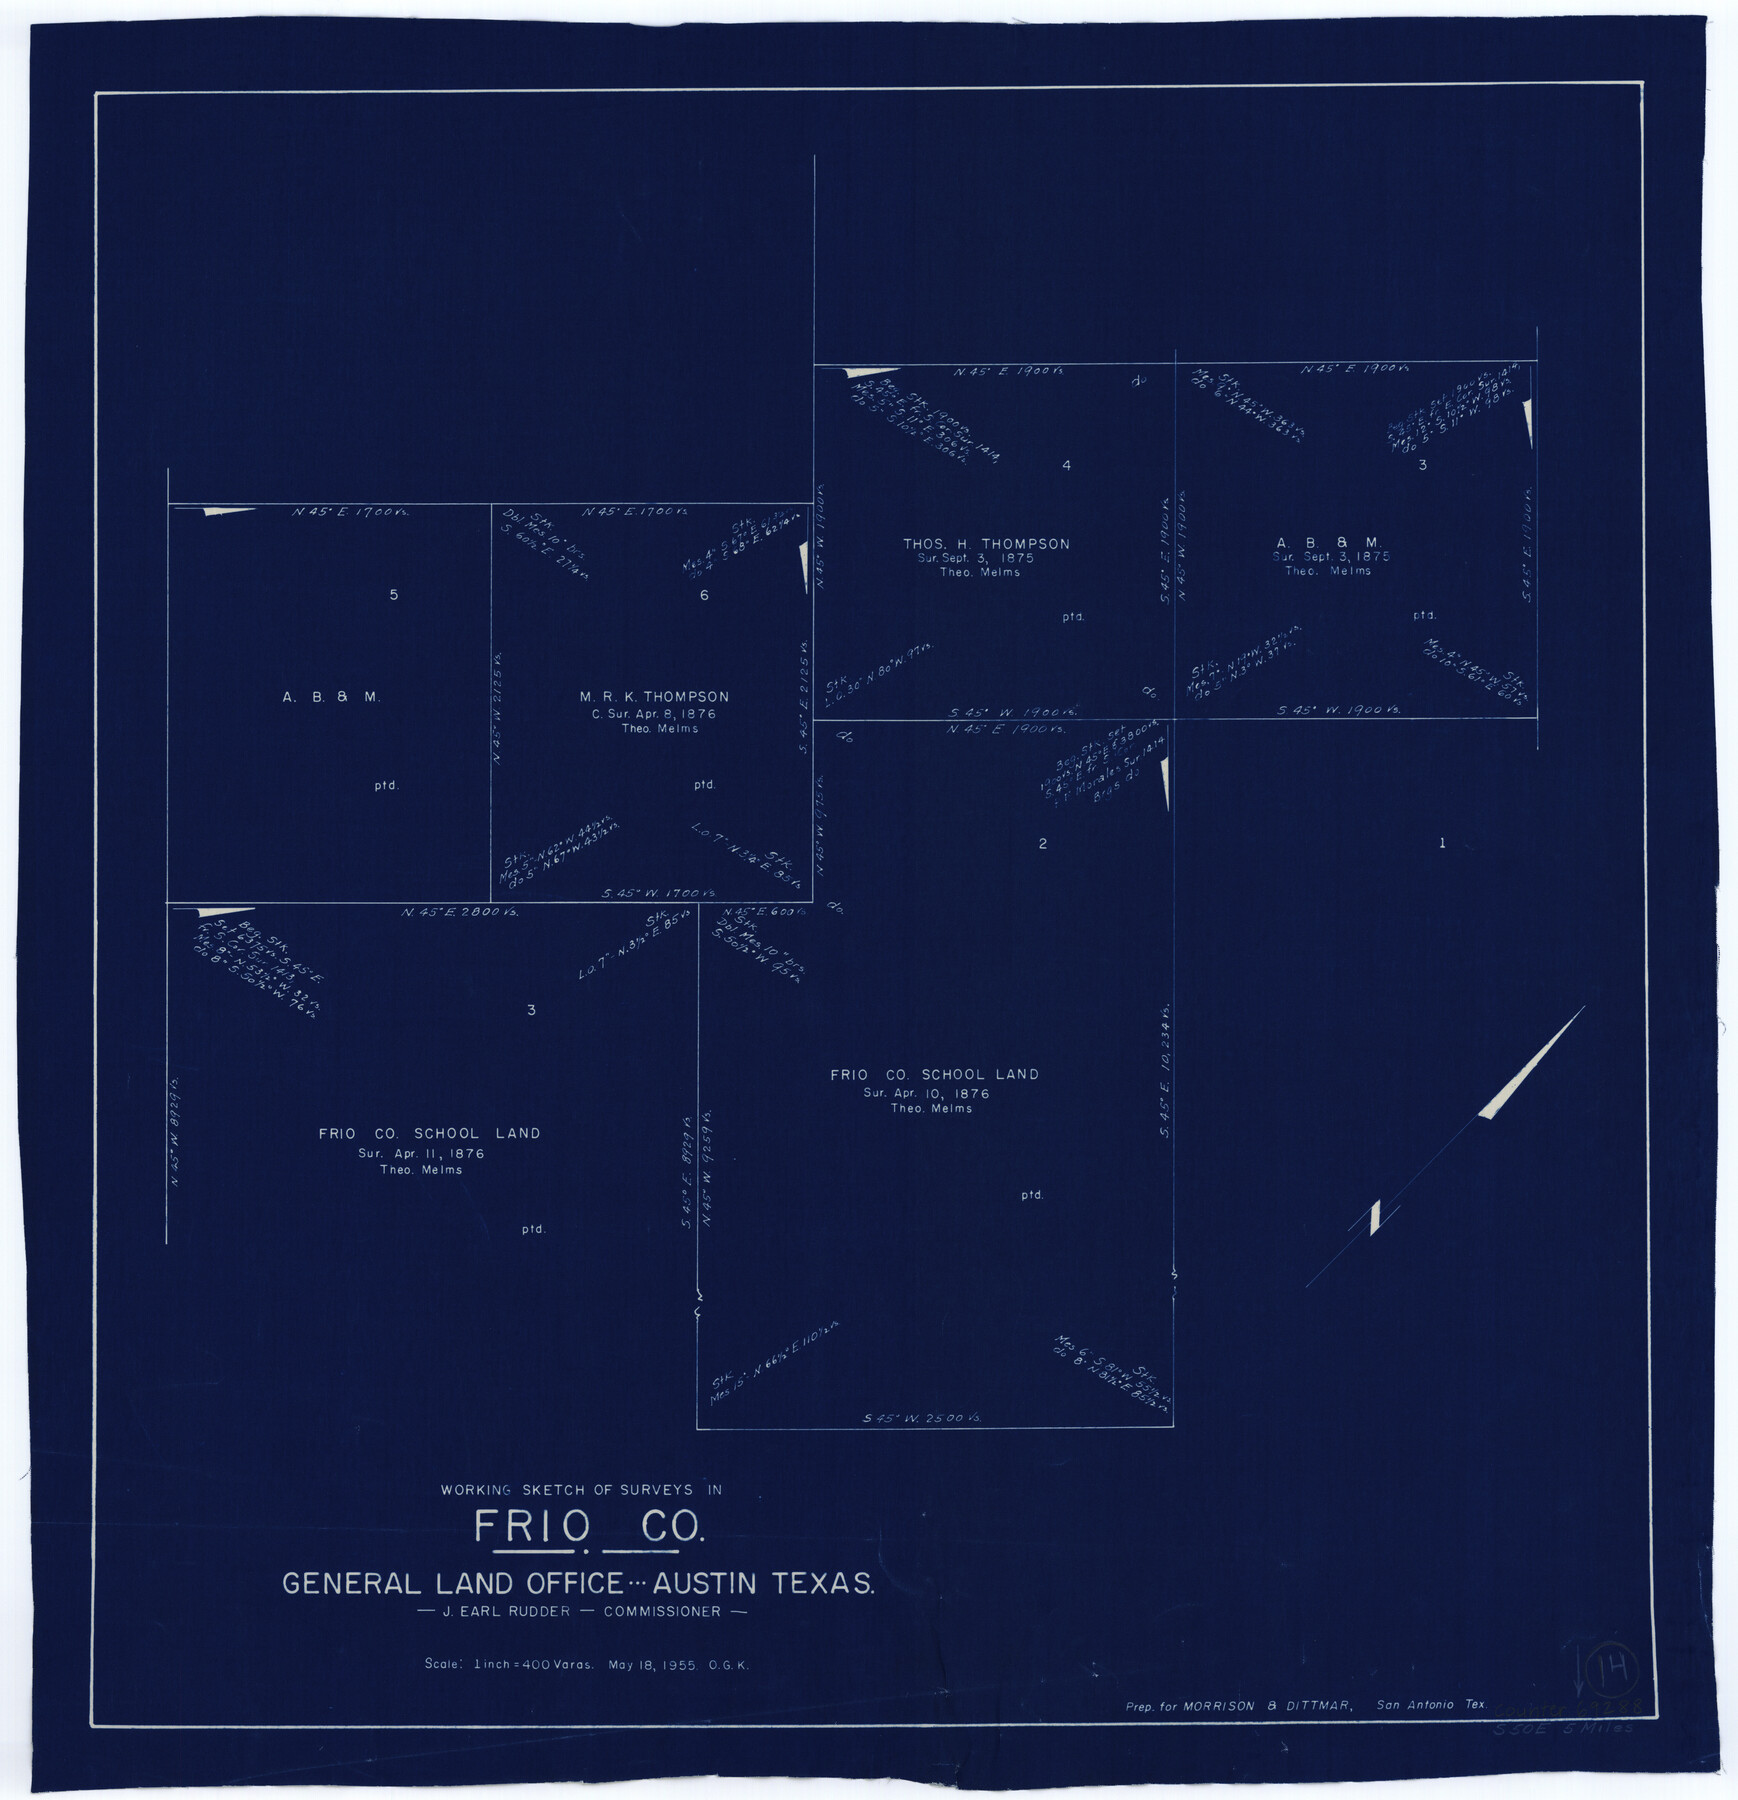 69288, Frio County Working Sketch 14, General Map Collection